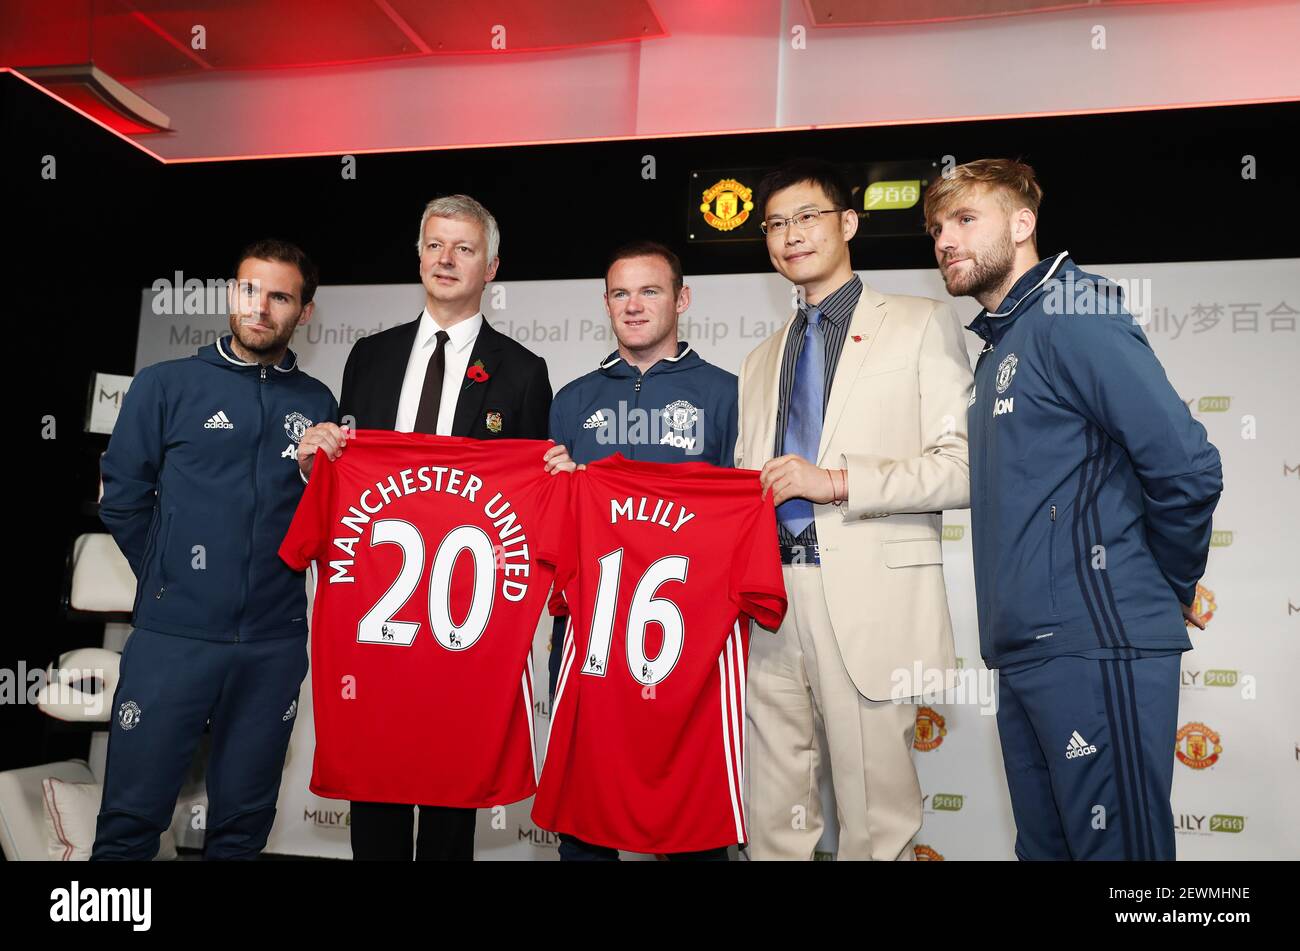 Philip Townsend (2nd L), Director of Communications for Manchester United, James Ni (2nd R), founder of Mlily and Manchester United players Juan Mata (left), Wayne Rooney (centre) and Luke Shaw (right) attend the Press Conference during which Manchester United announced a global partnership with Mlily to herald the English Premier League giant's first ever official mattress and pillow partner at its Carrington Training Complex in Manchester, England on Oct. 31, 2016. Stock Photo